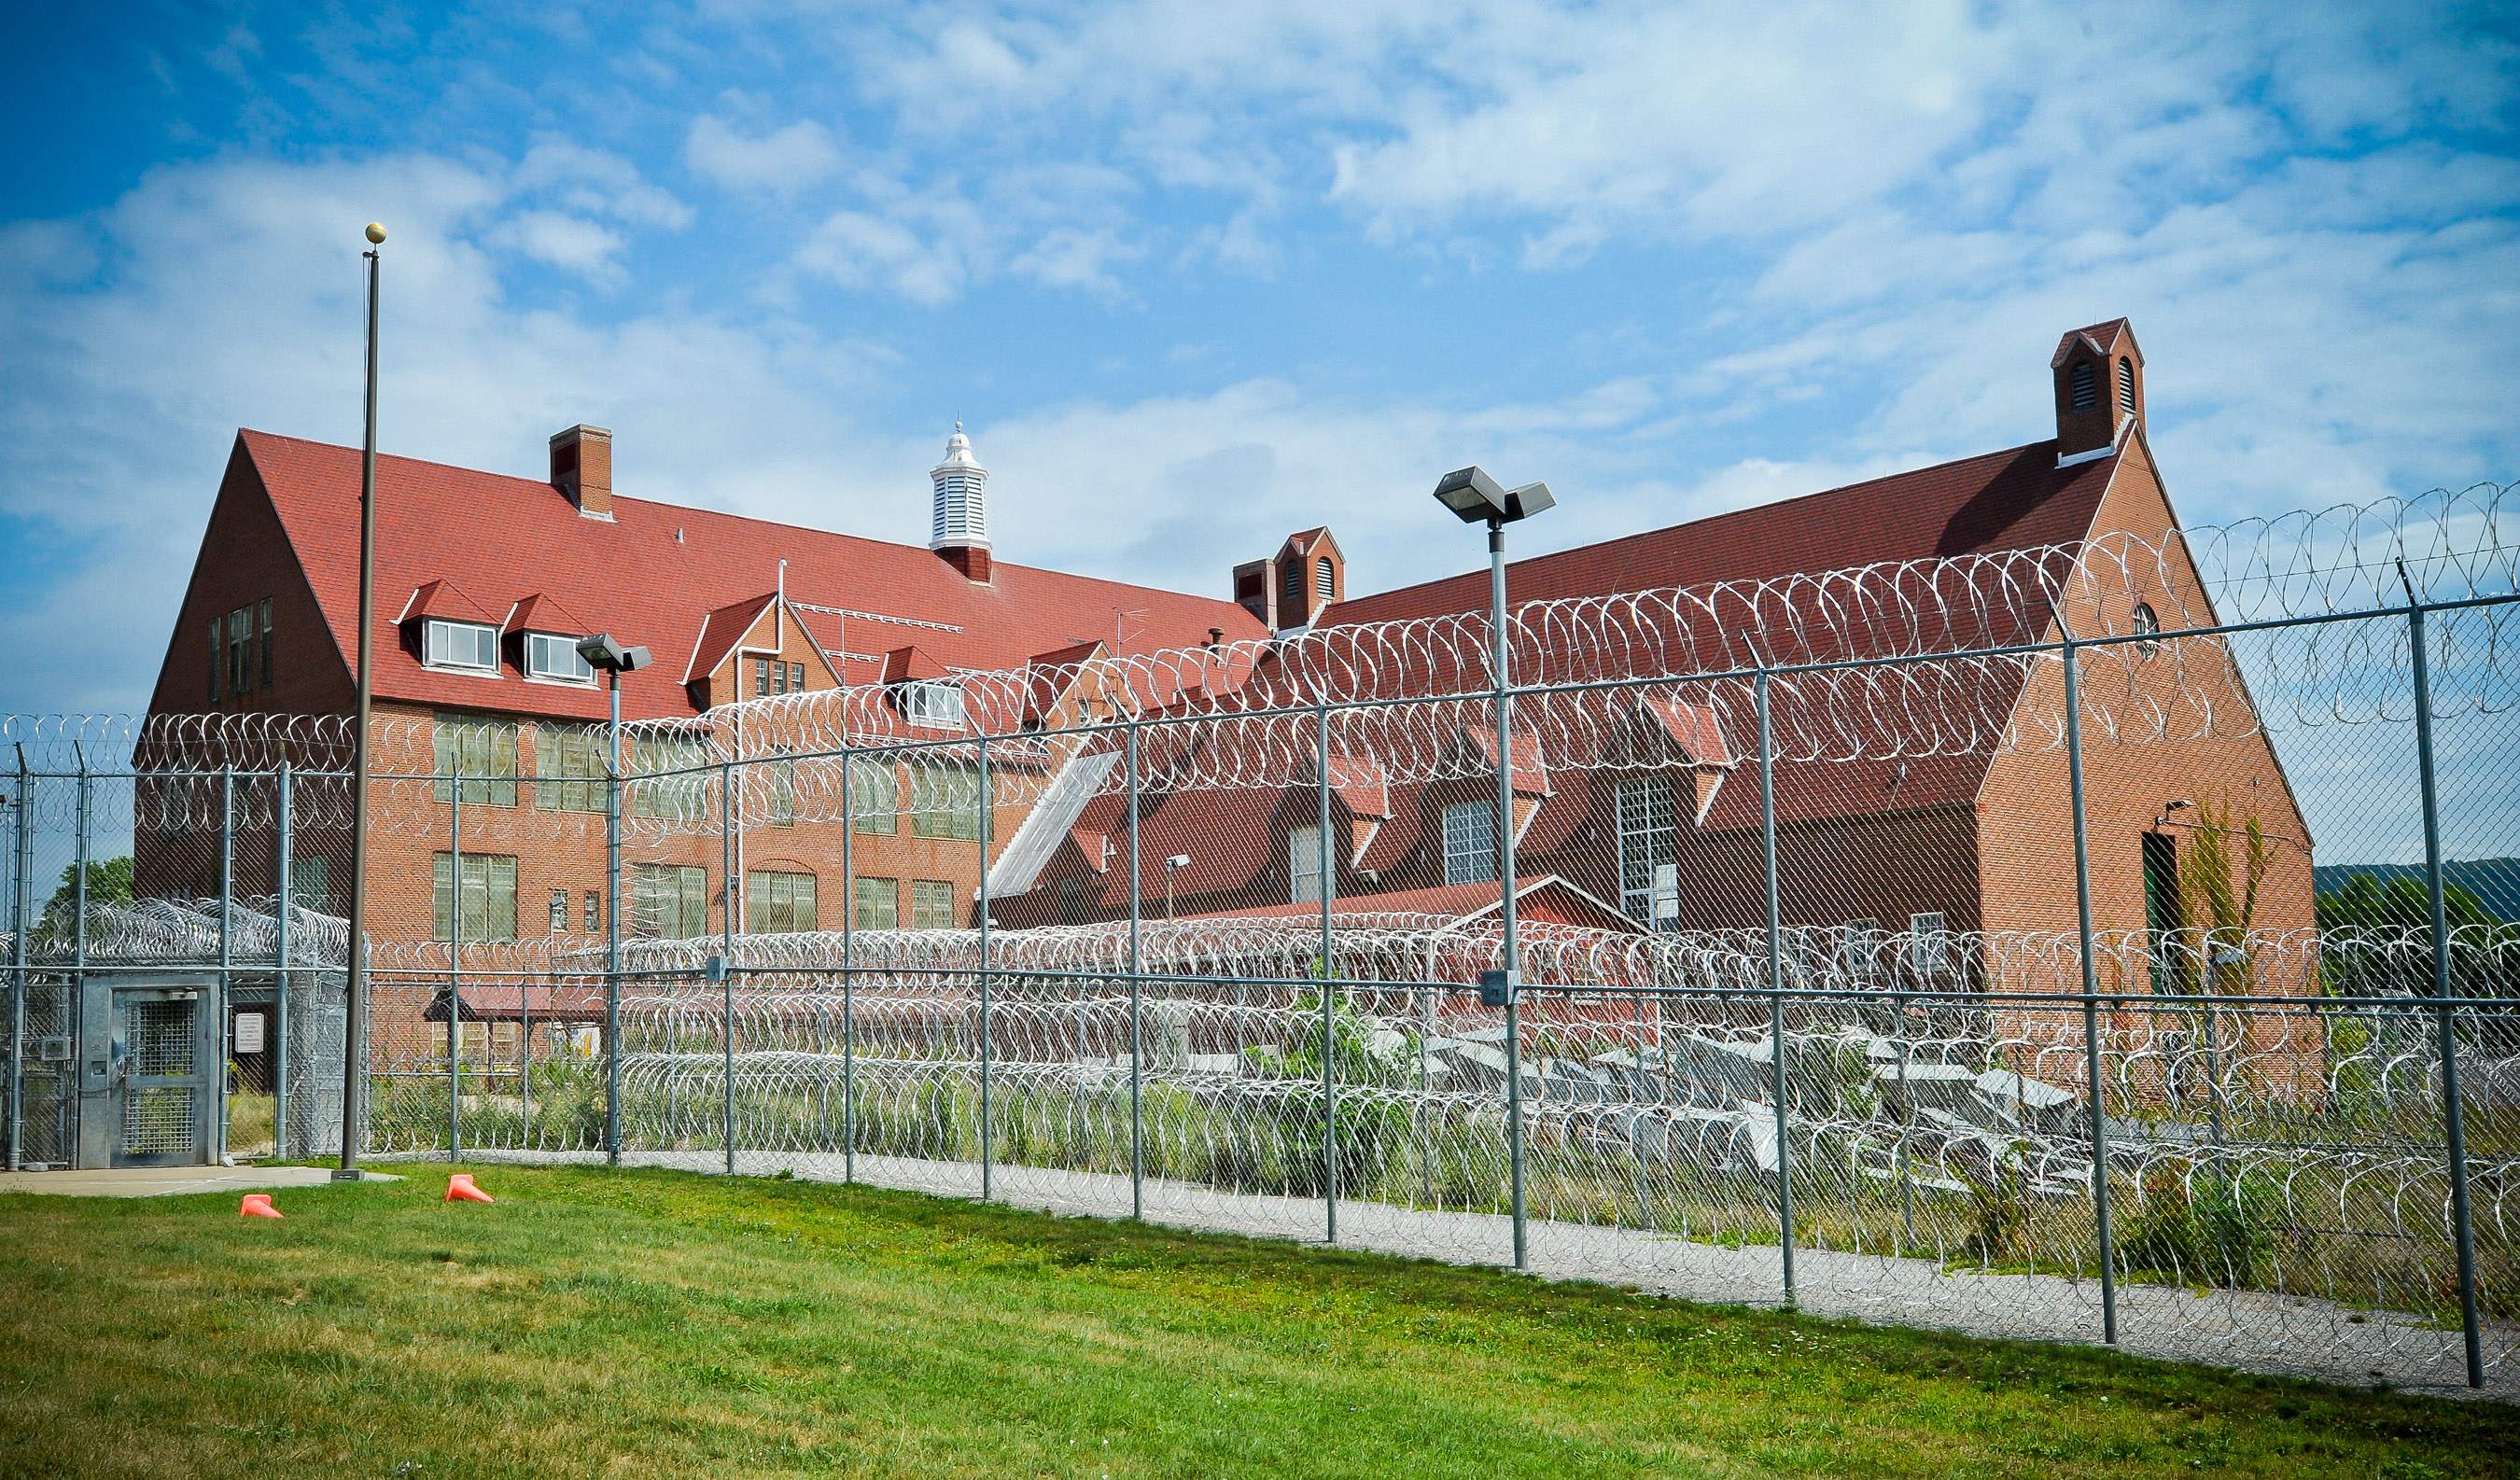 New York Prison Is About to Become Massive Corporate Weed Complex